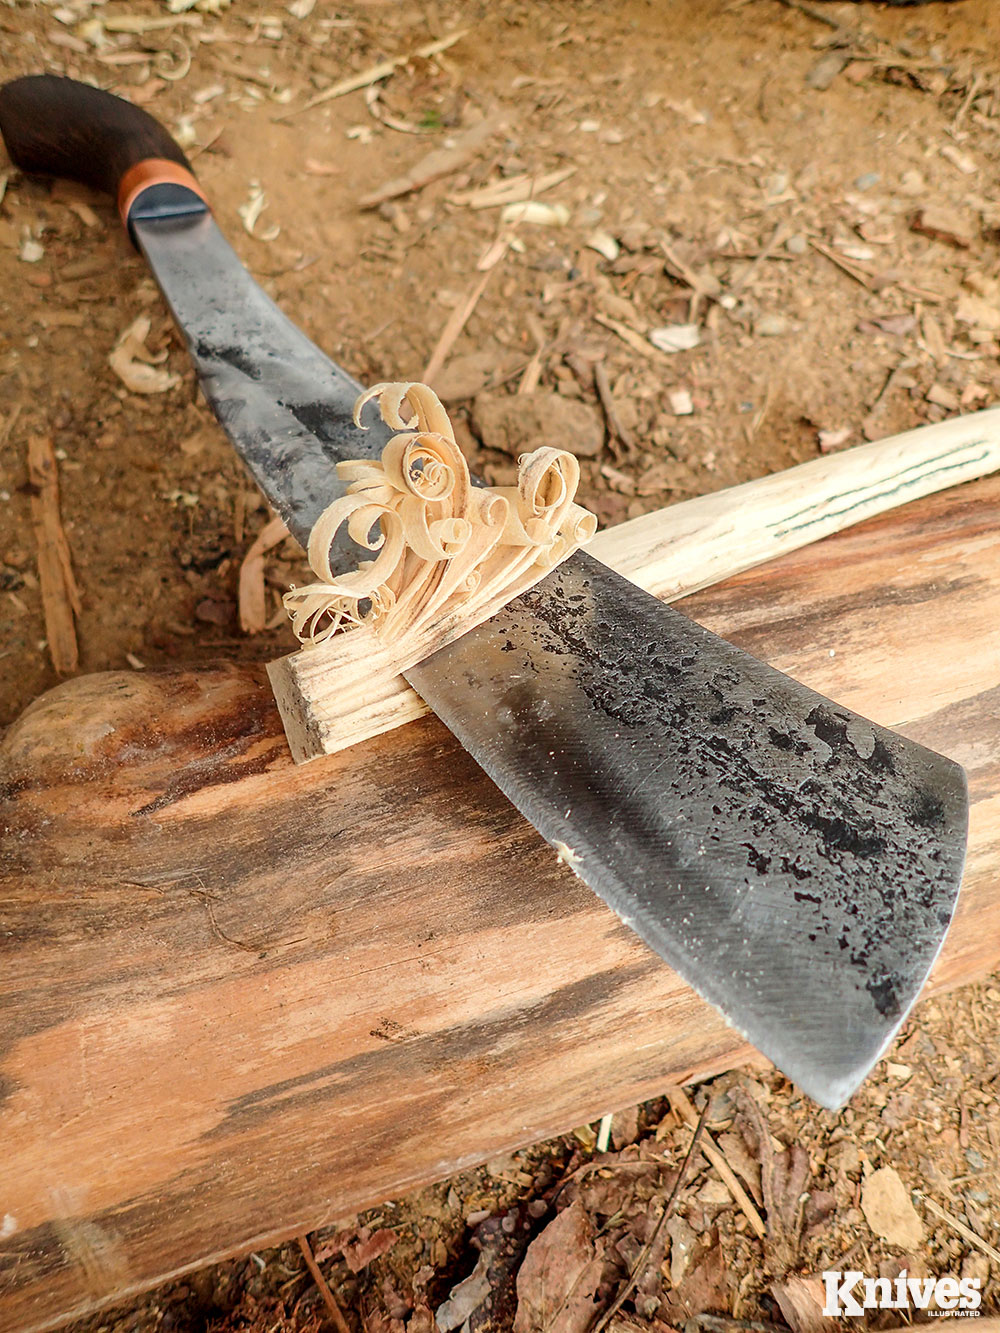 Choking up on the unsharpened portion of the blade allows for fine carving making tools or shaving feather sticks for a fire.